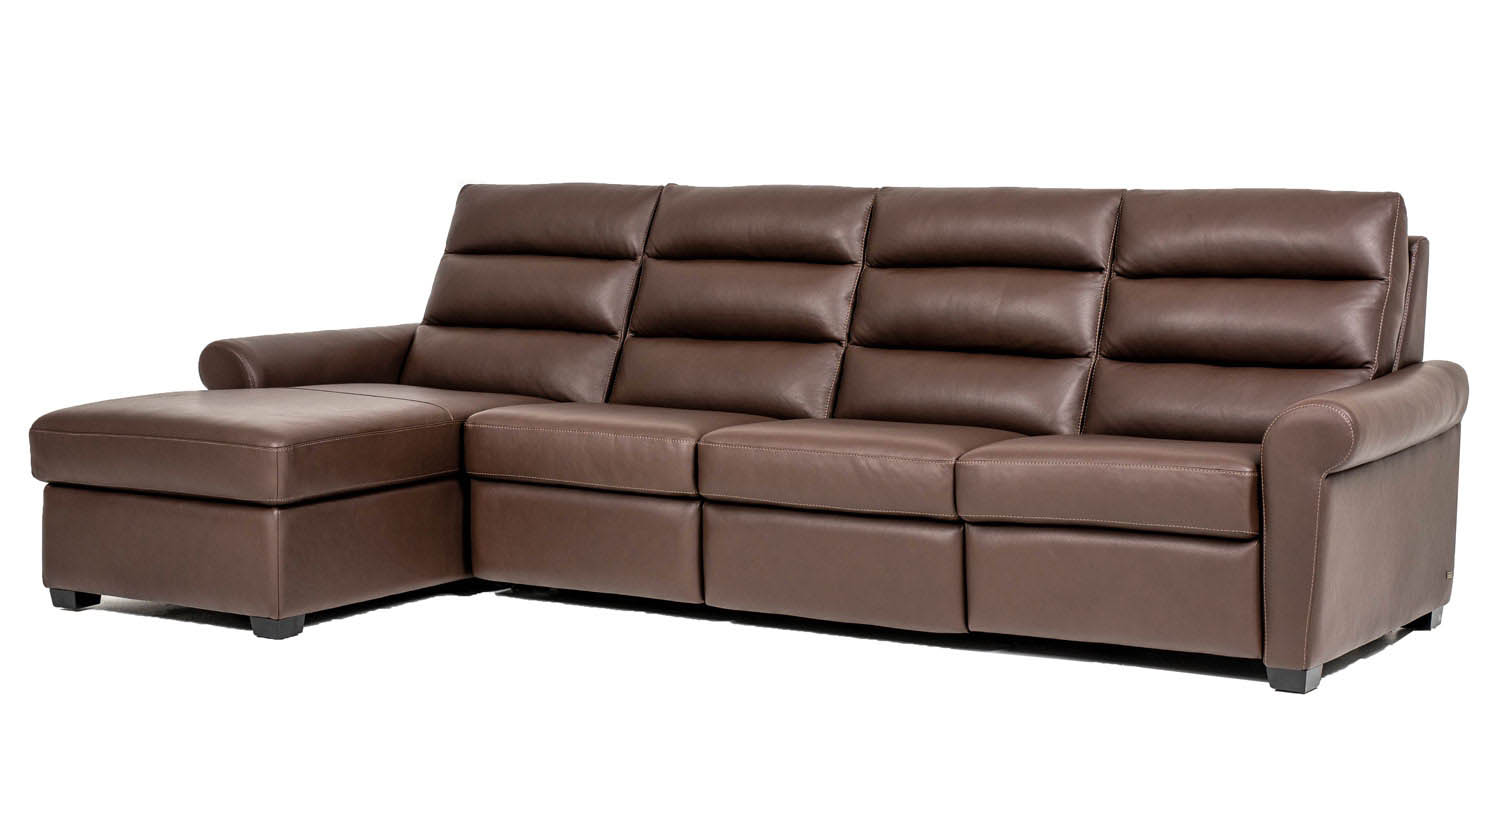 Circle Furniture Austin Motion Chaise, Leather Couches Austin